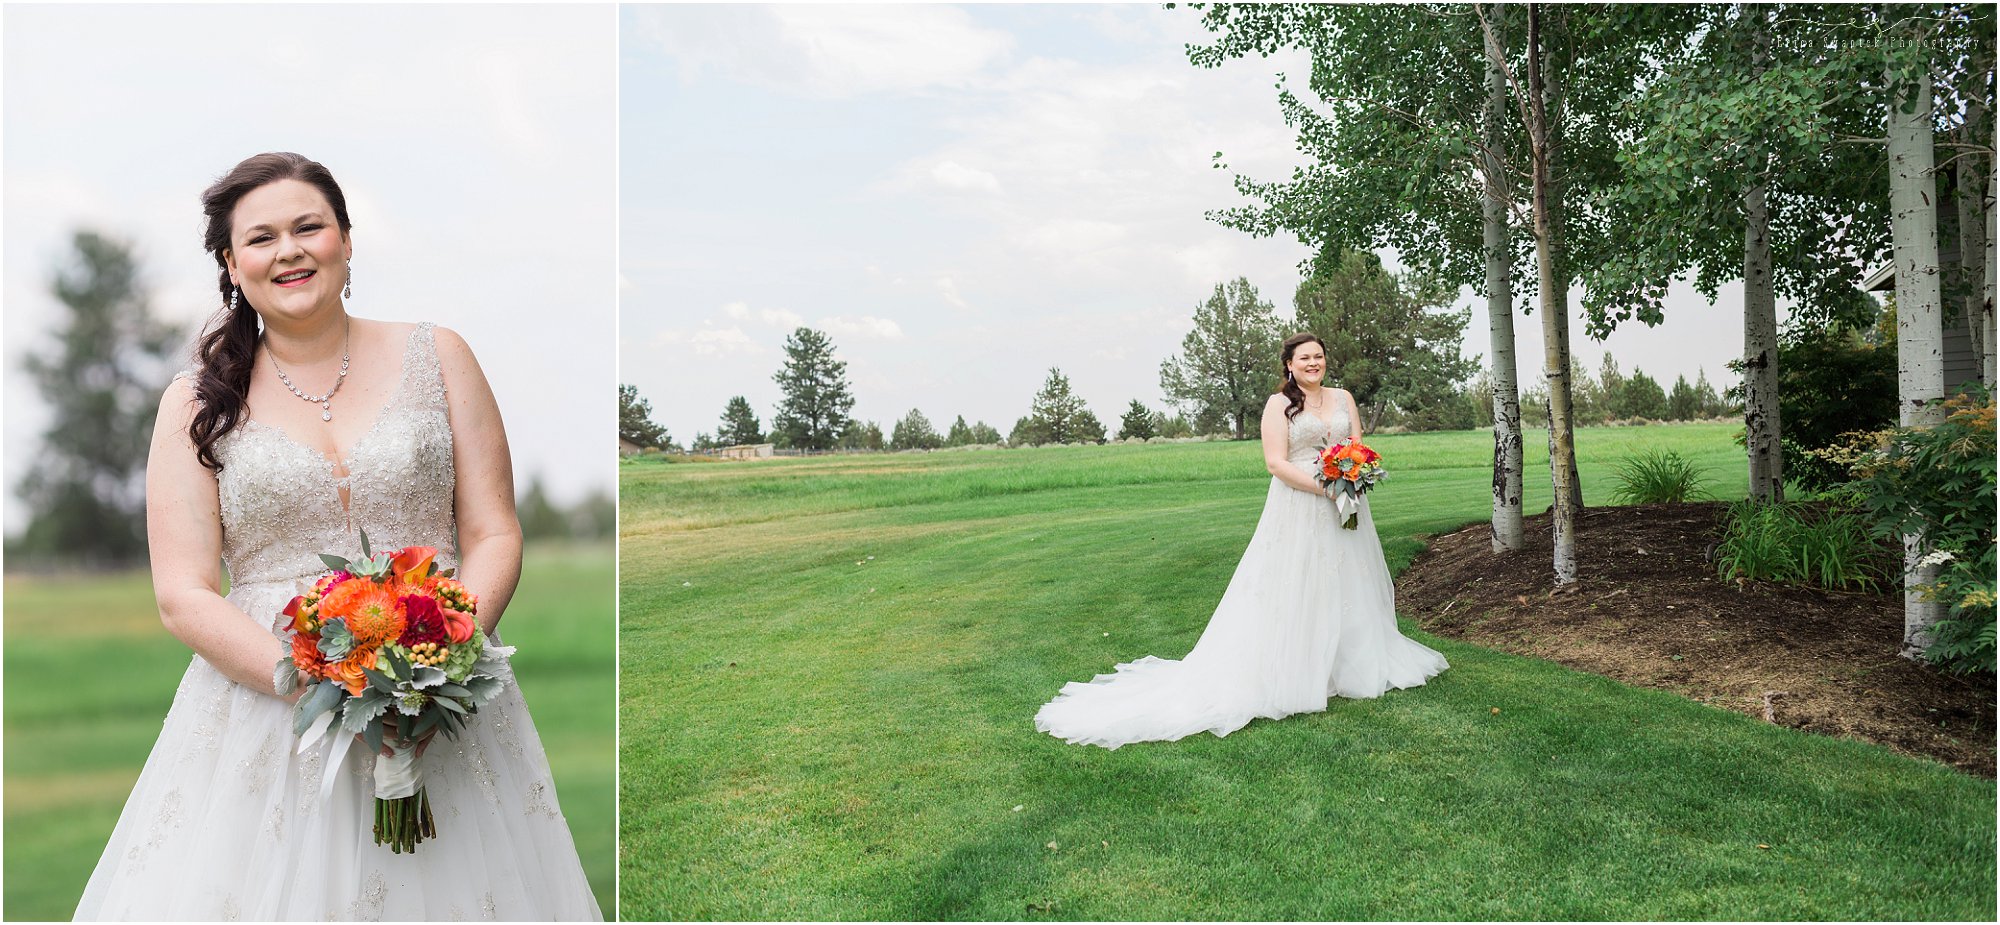 A gorgeous bride poses for some formal bridal portraits before her Bend Oregon wedding. | Erica Swantek Photography